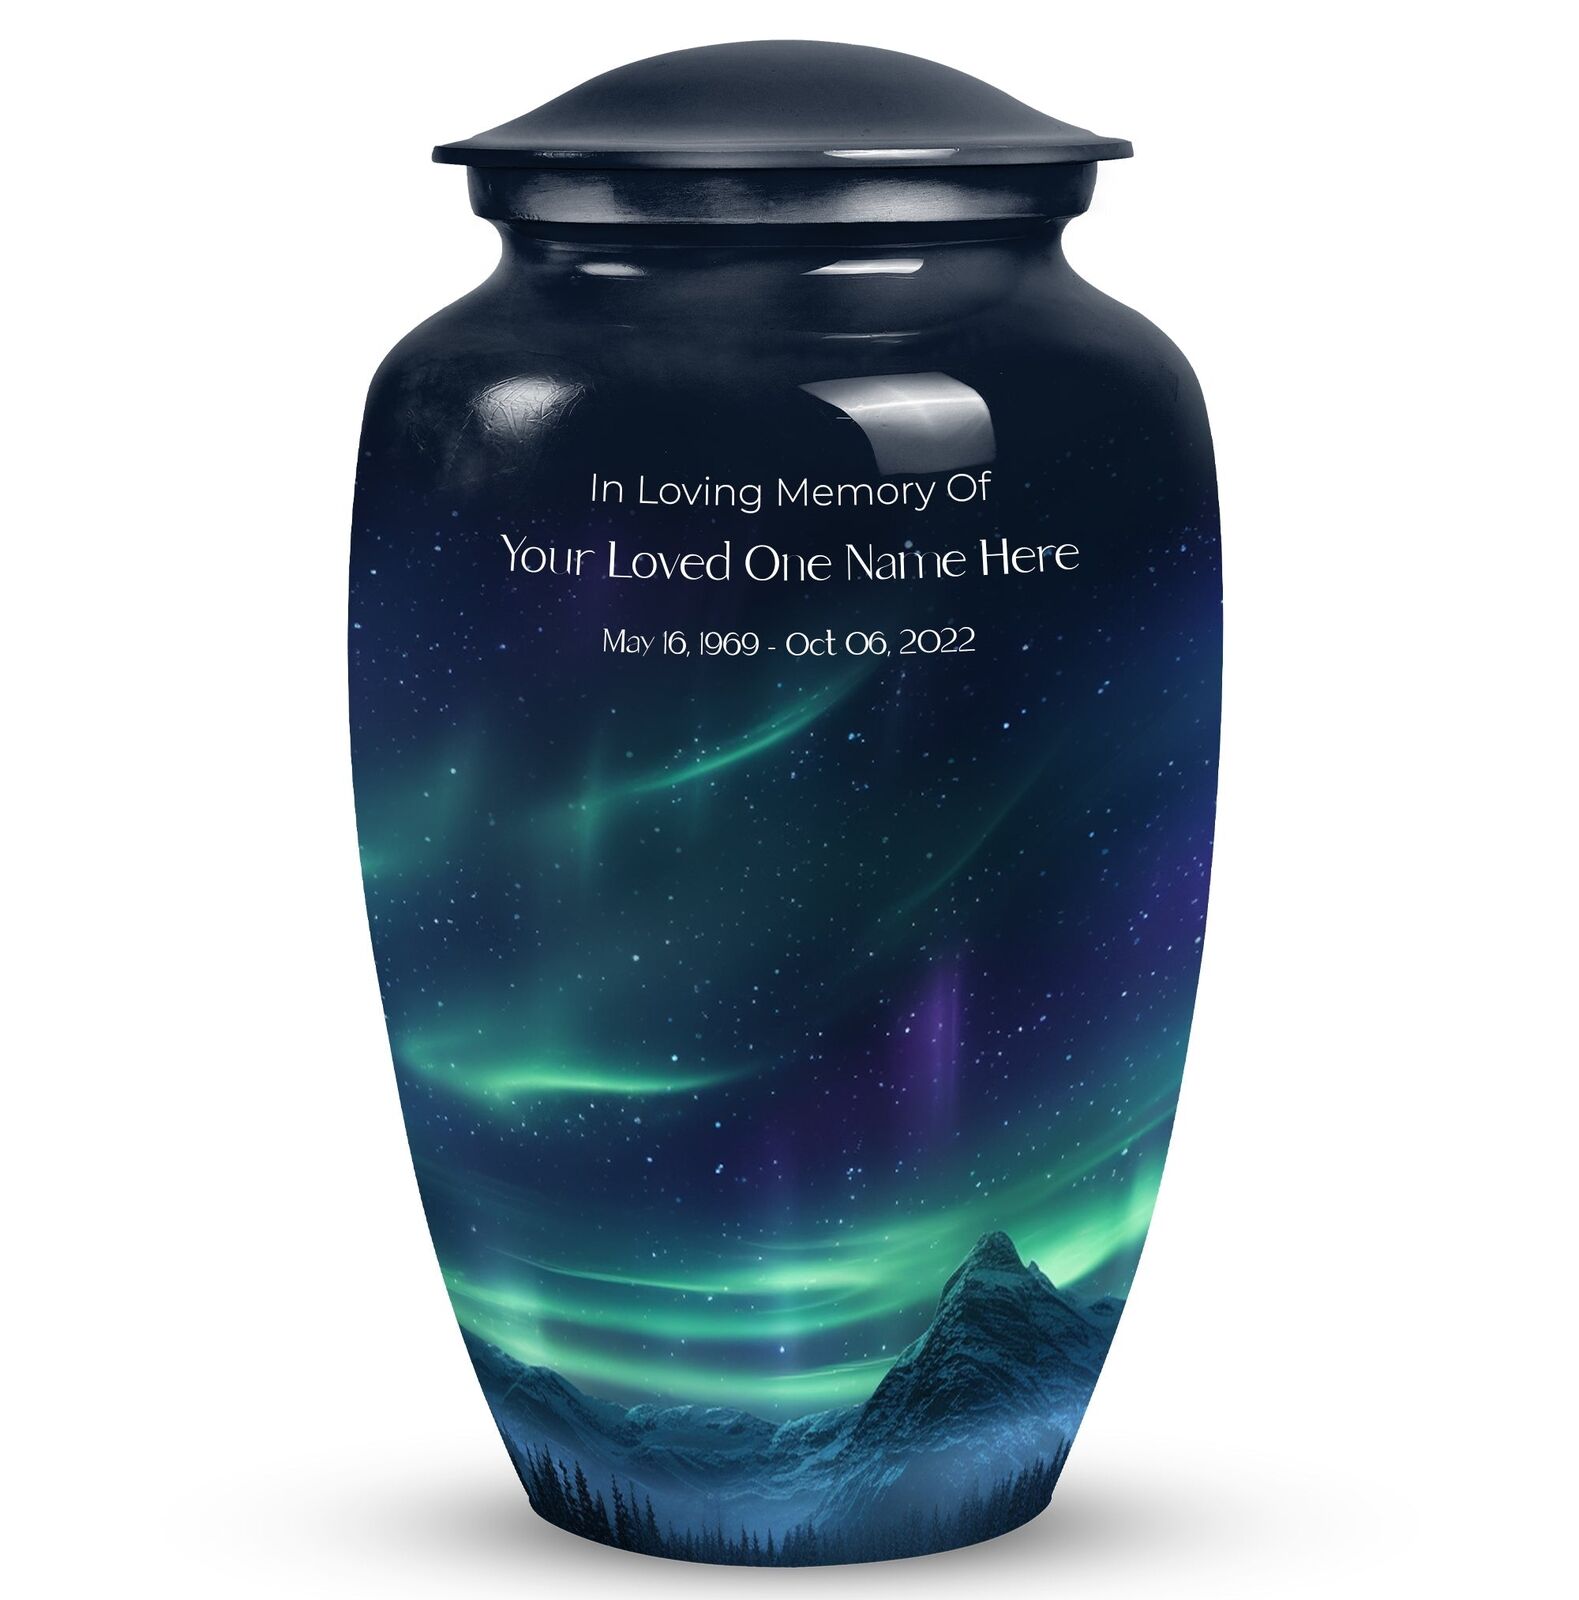 Aurora Borealis Northern Lights Urn | Containers For Human Ashes After Cremation